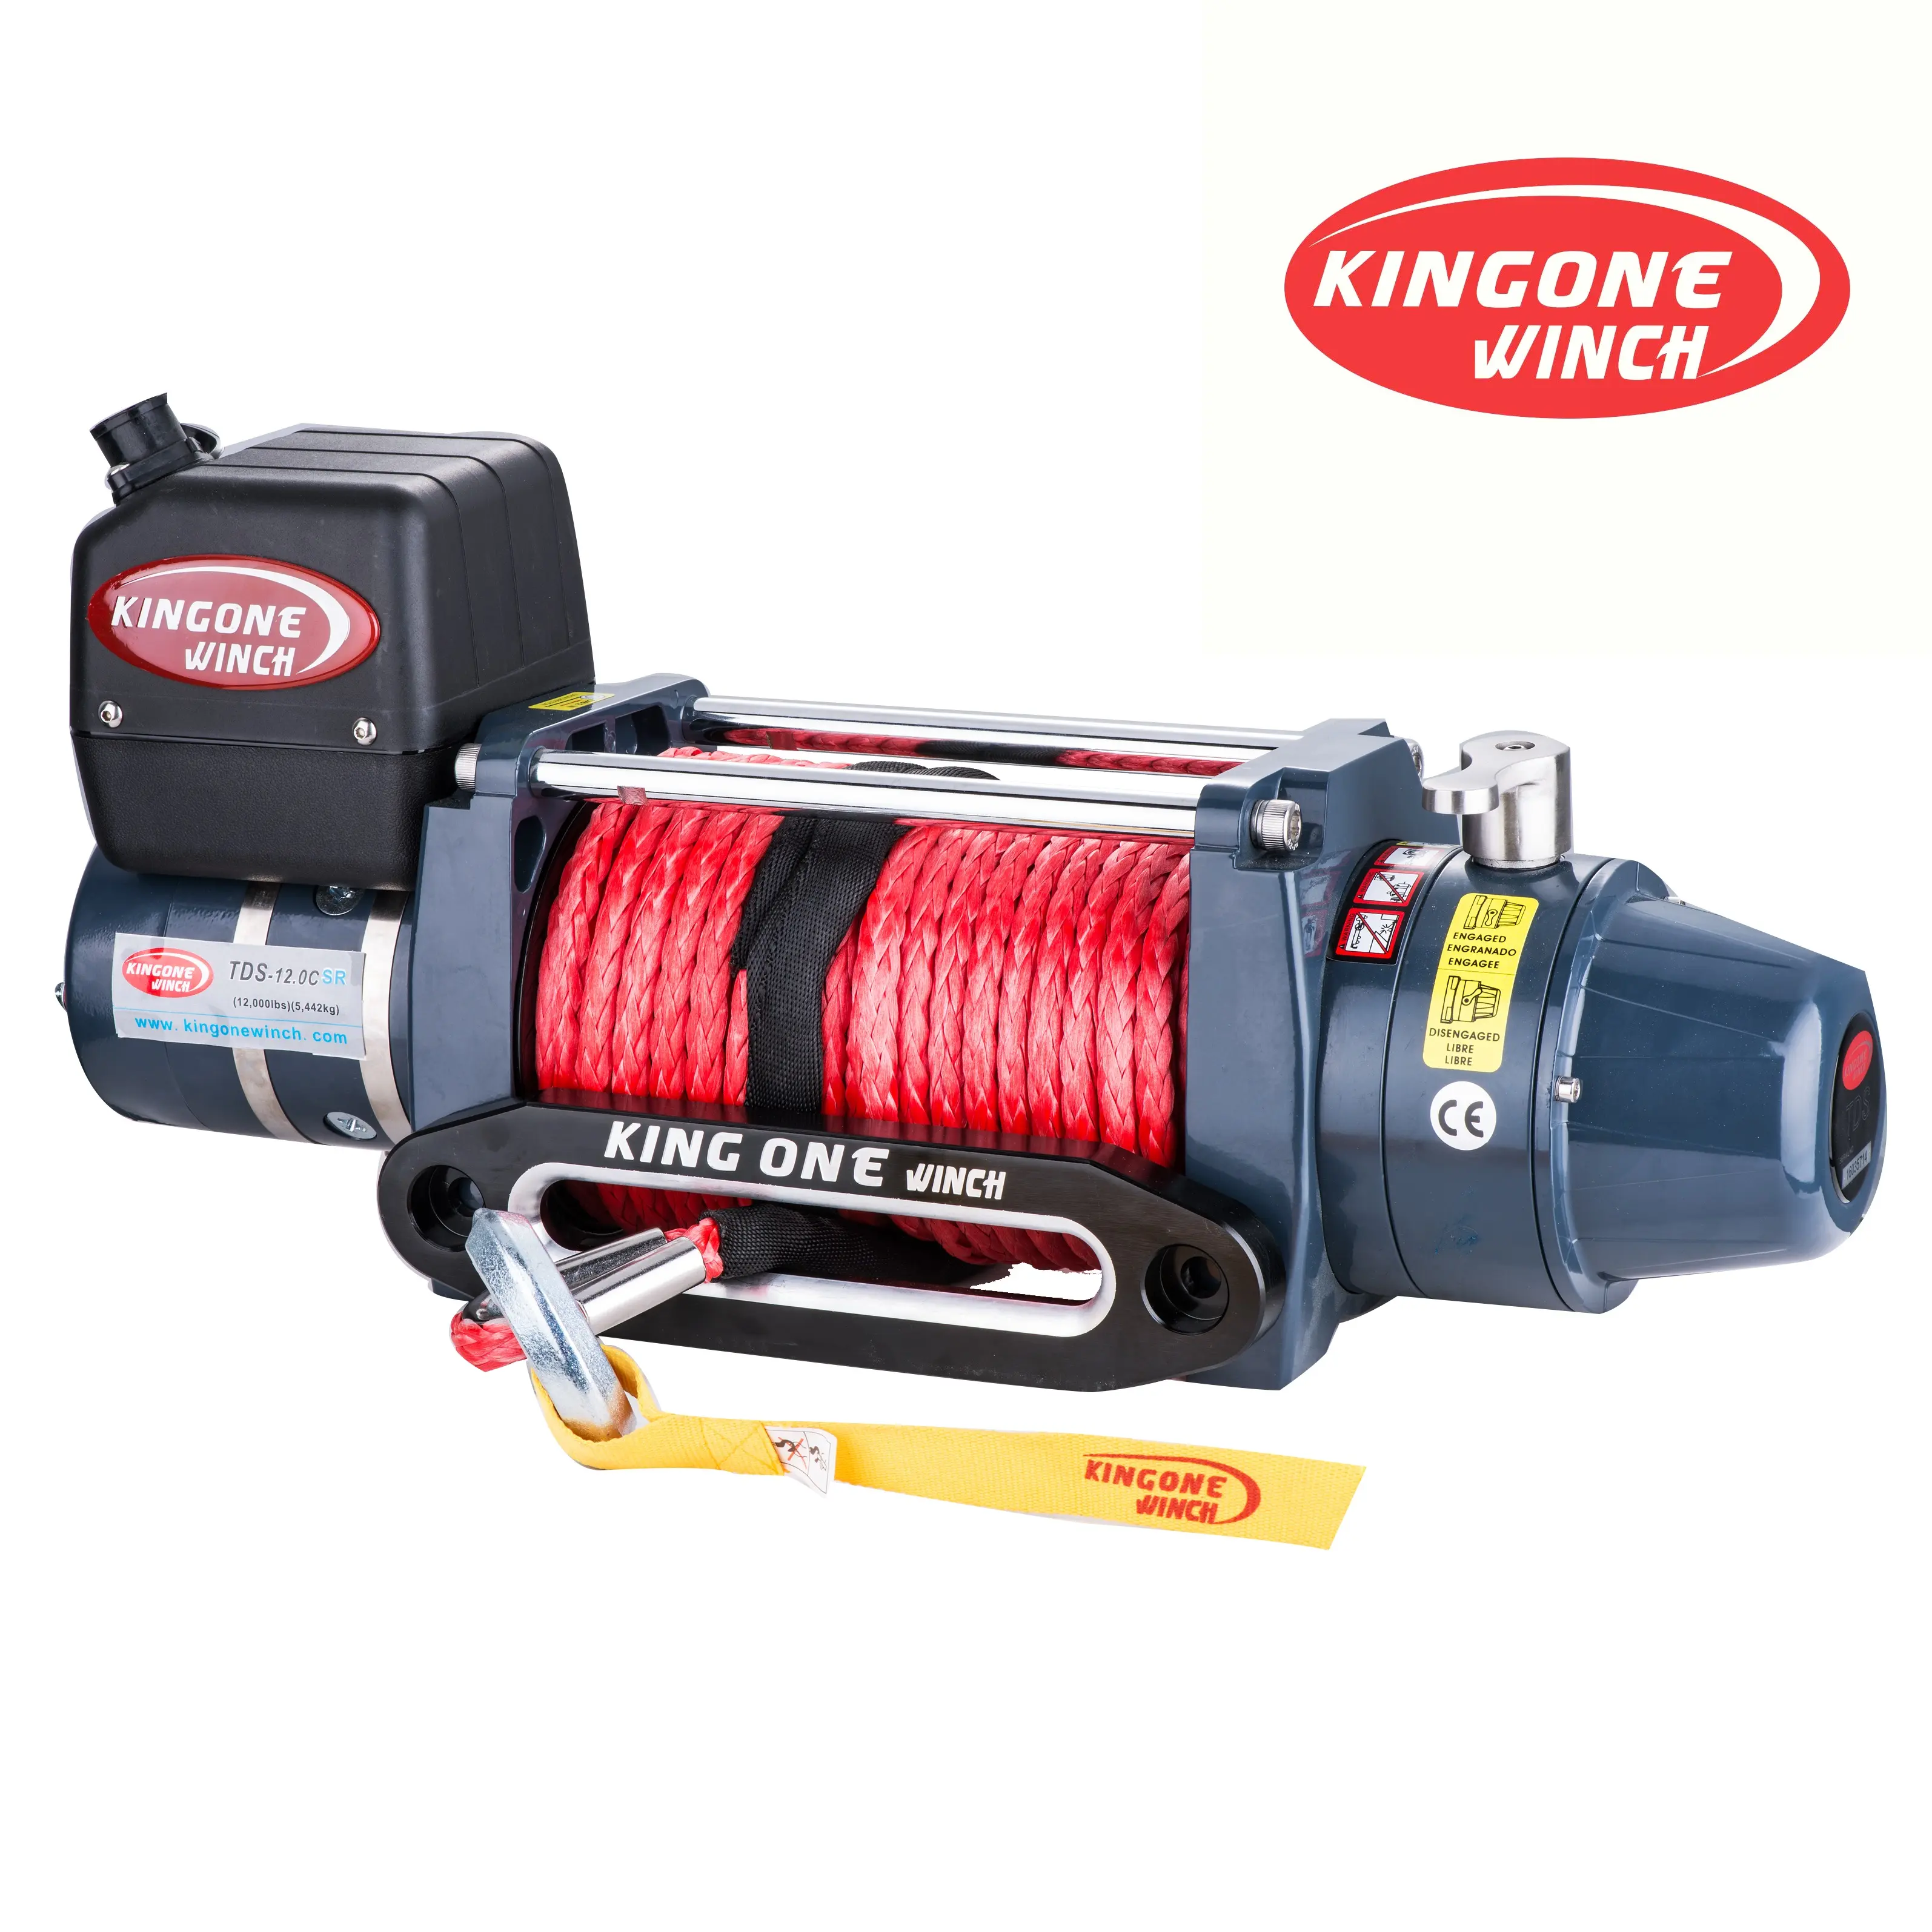 KINGONE WINCH 12v and 24v Synthetic Rope 12000lbs Off-road 4x4 Electric Winch for SUV, jeep and car